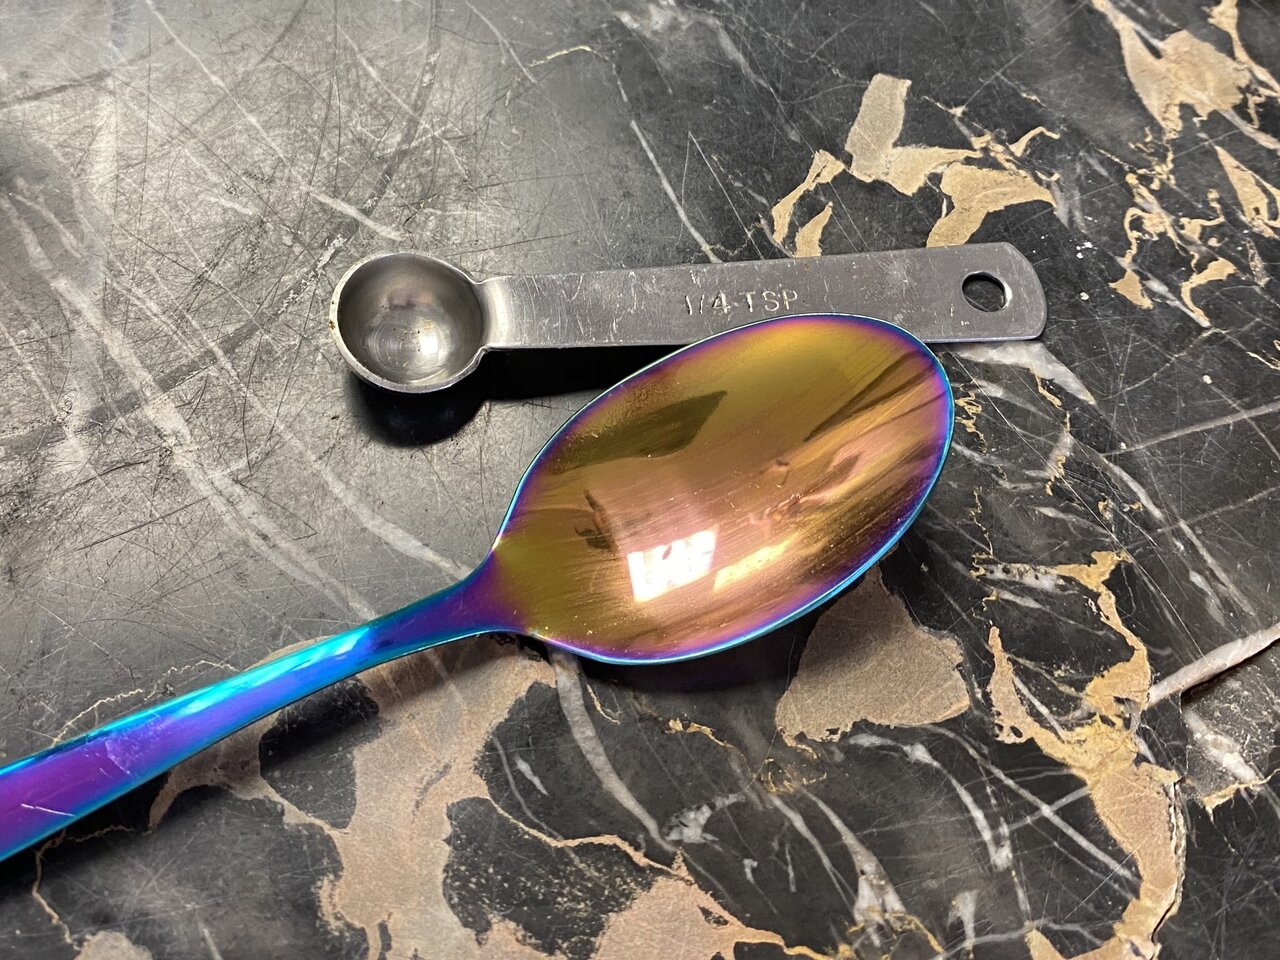 Lick the spoon clean